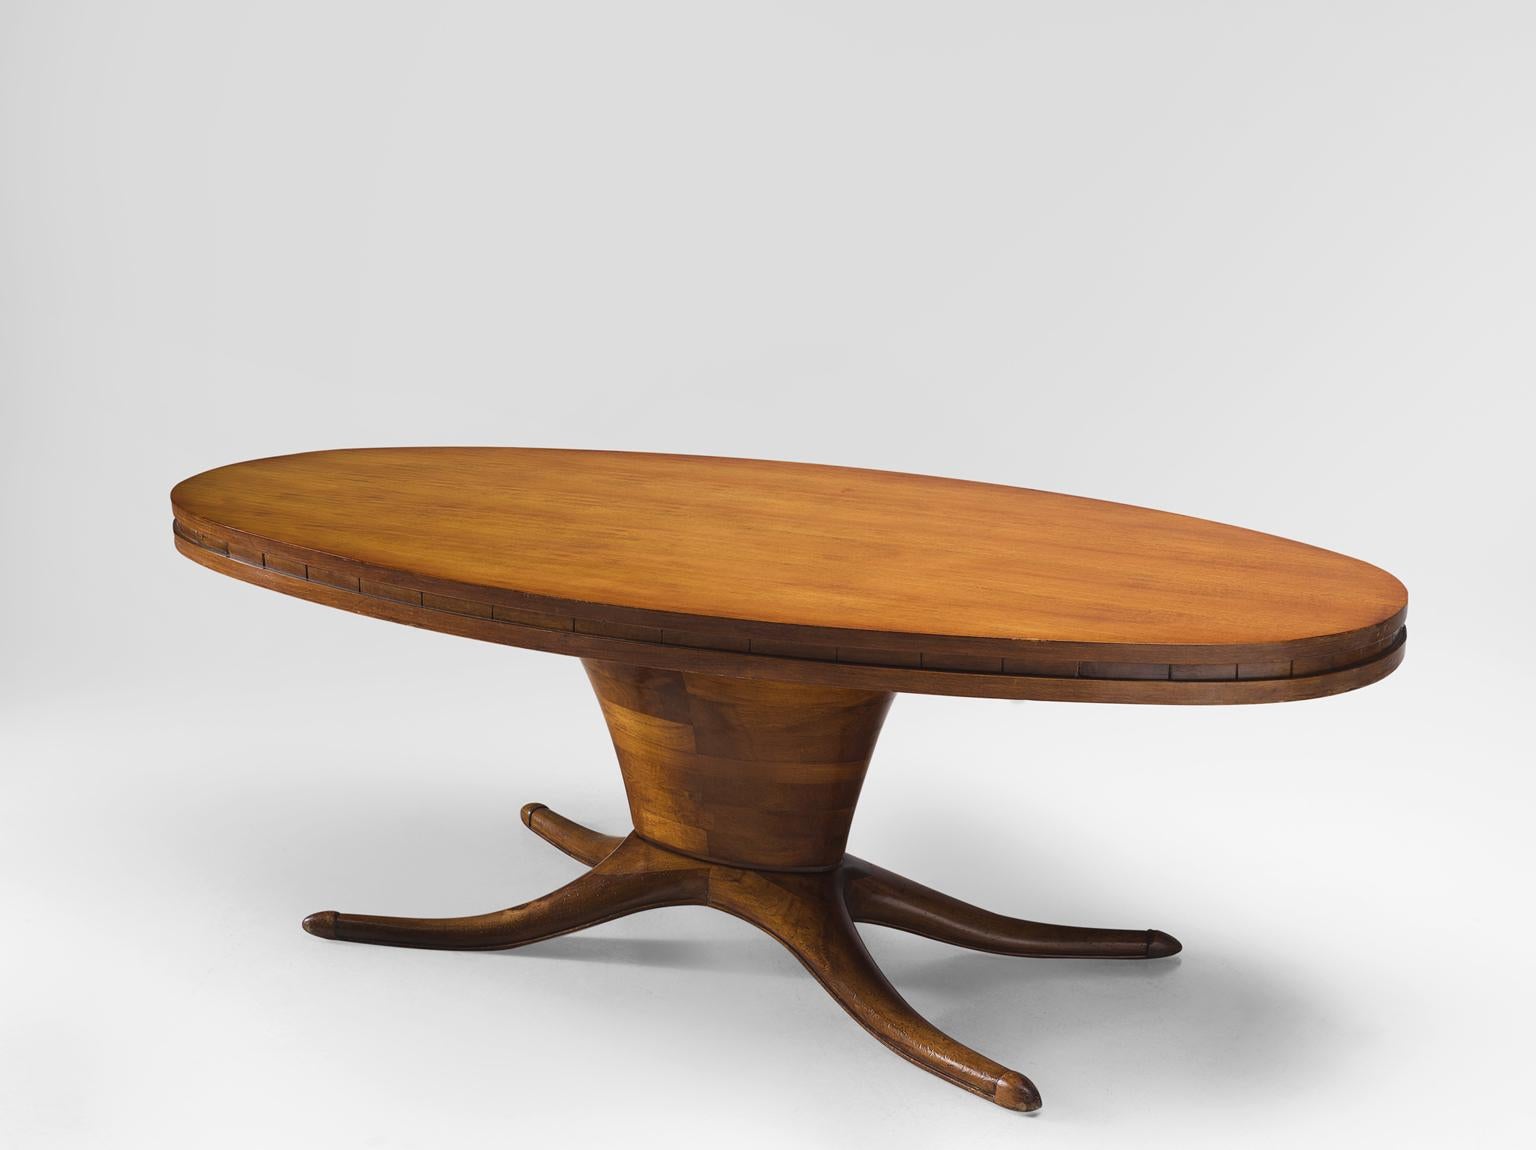 Dining table, walnut, Italy 1950s.

This oval dining table is executed in walnut veneer. The most striking detail of this table is the leg that is divided into a biomorphic foot. This element, combined with the oval base and oval top makes an